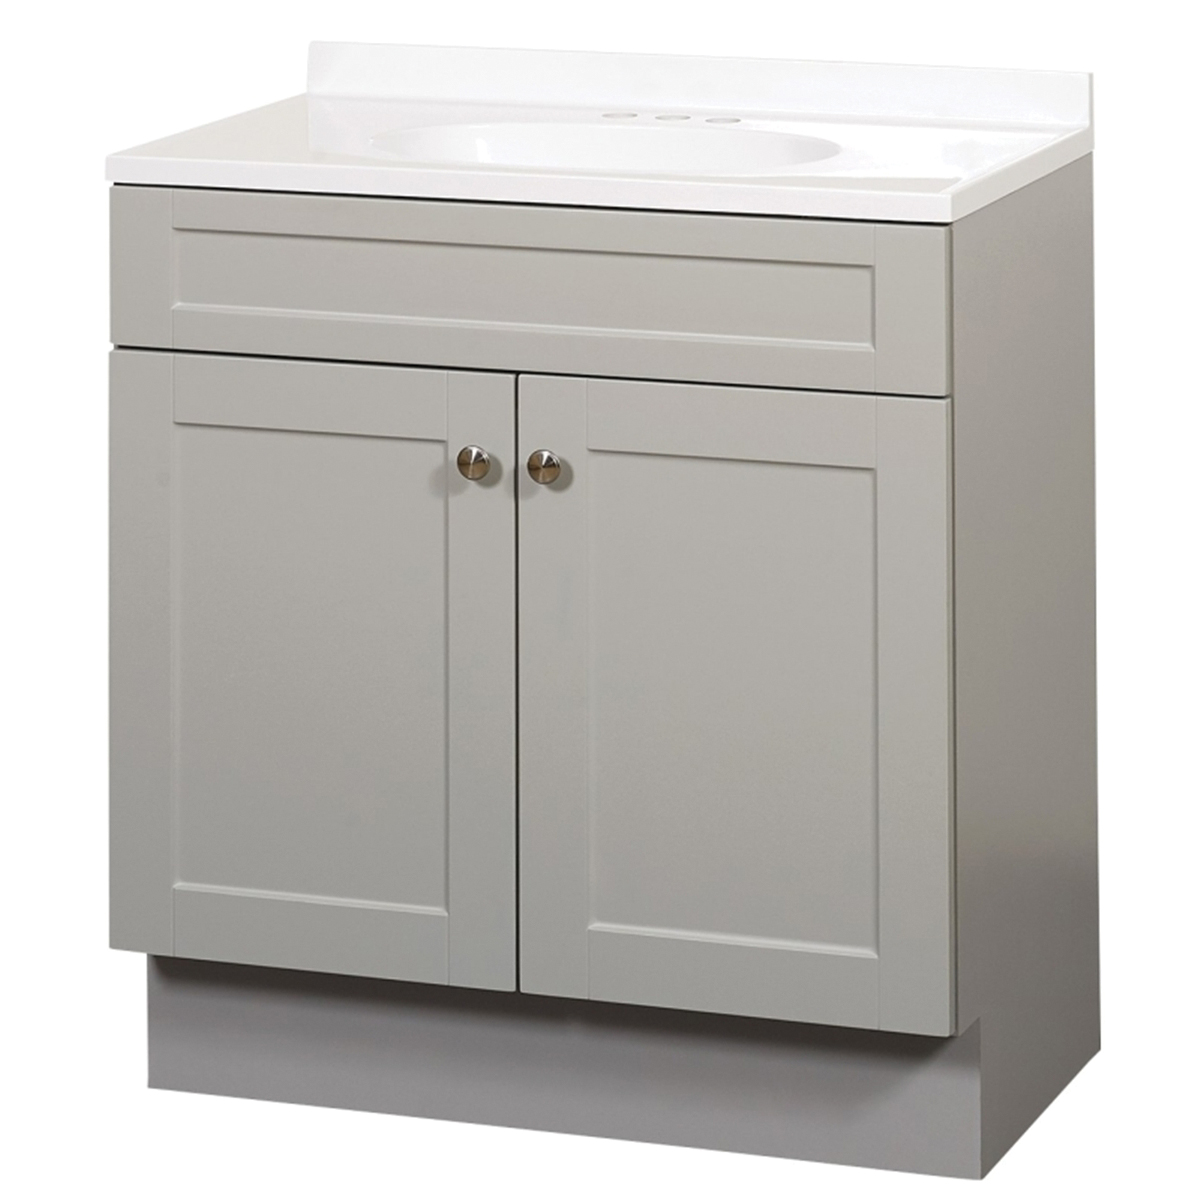 Zenna Home SBC30GY 2-Door Shaker Vanity with Top, Wood, Cool Gray, Cultured Marble Sink, White Sink, 1/EA